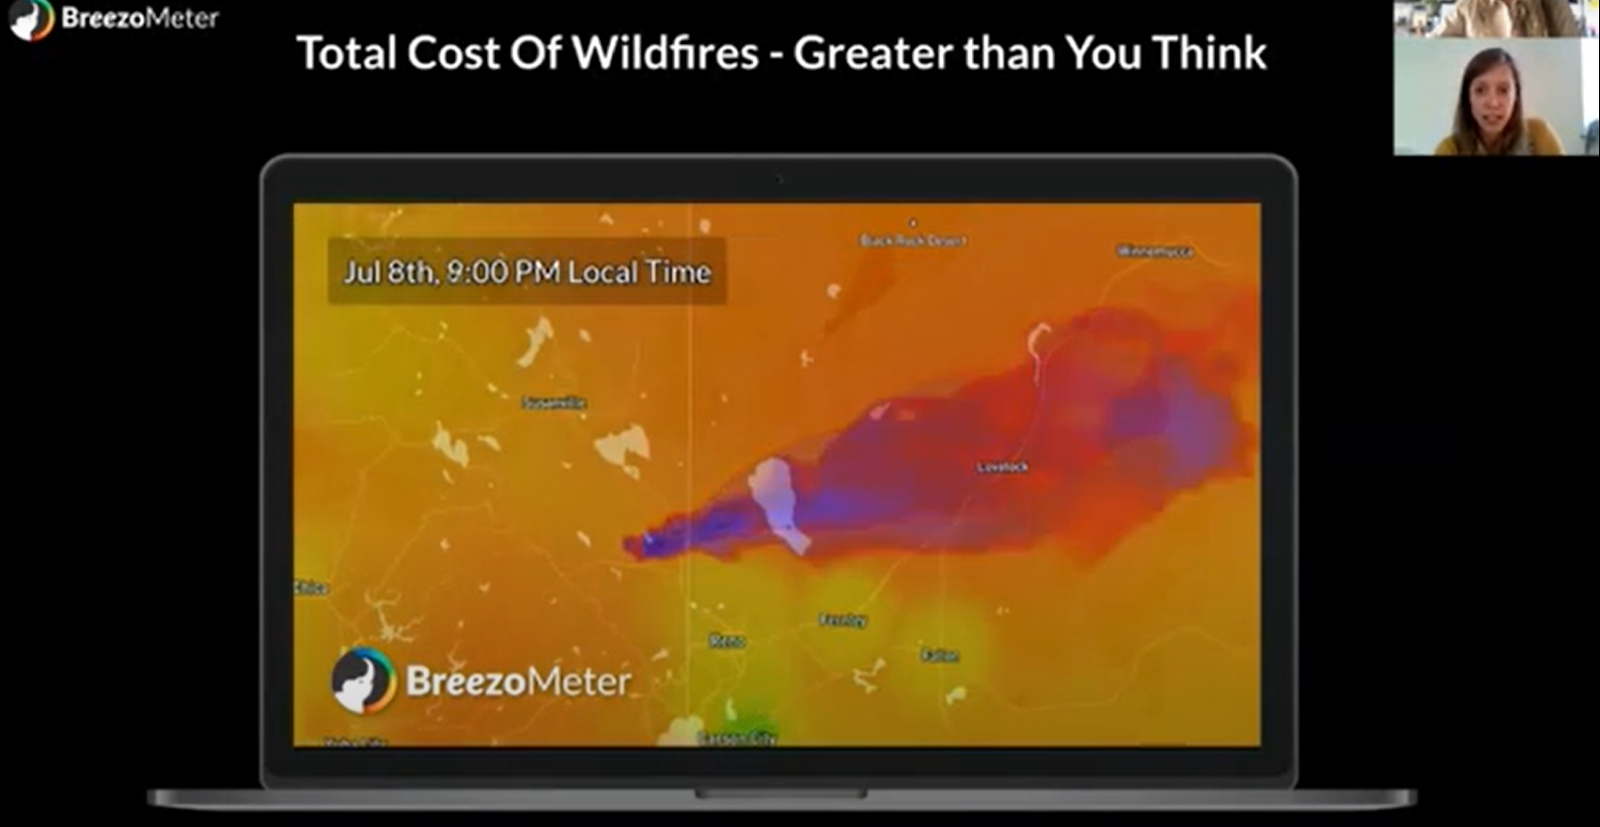 Image of Wildfire Tracking: Total Cost of Wildfires is Greater Than You Think